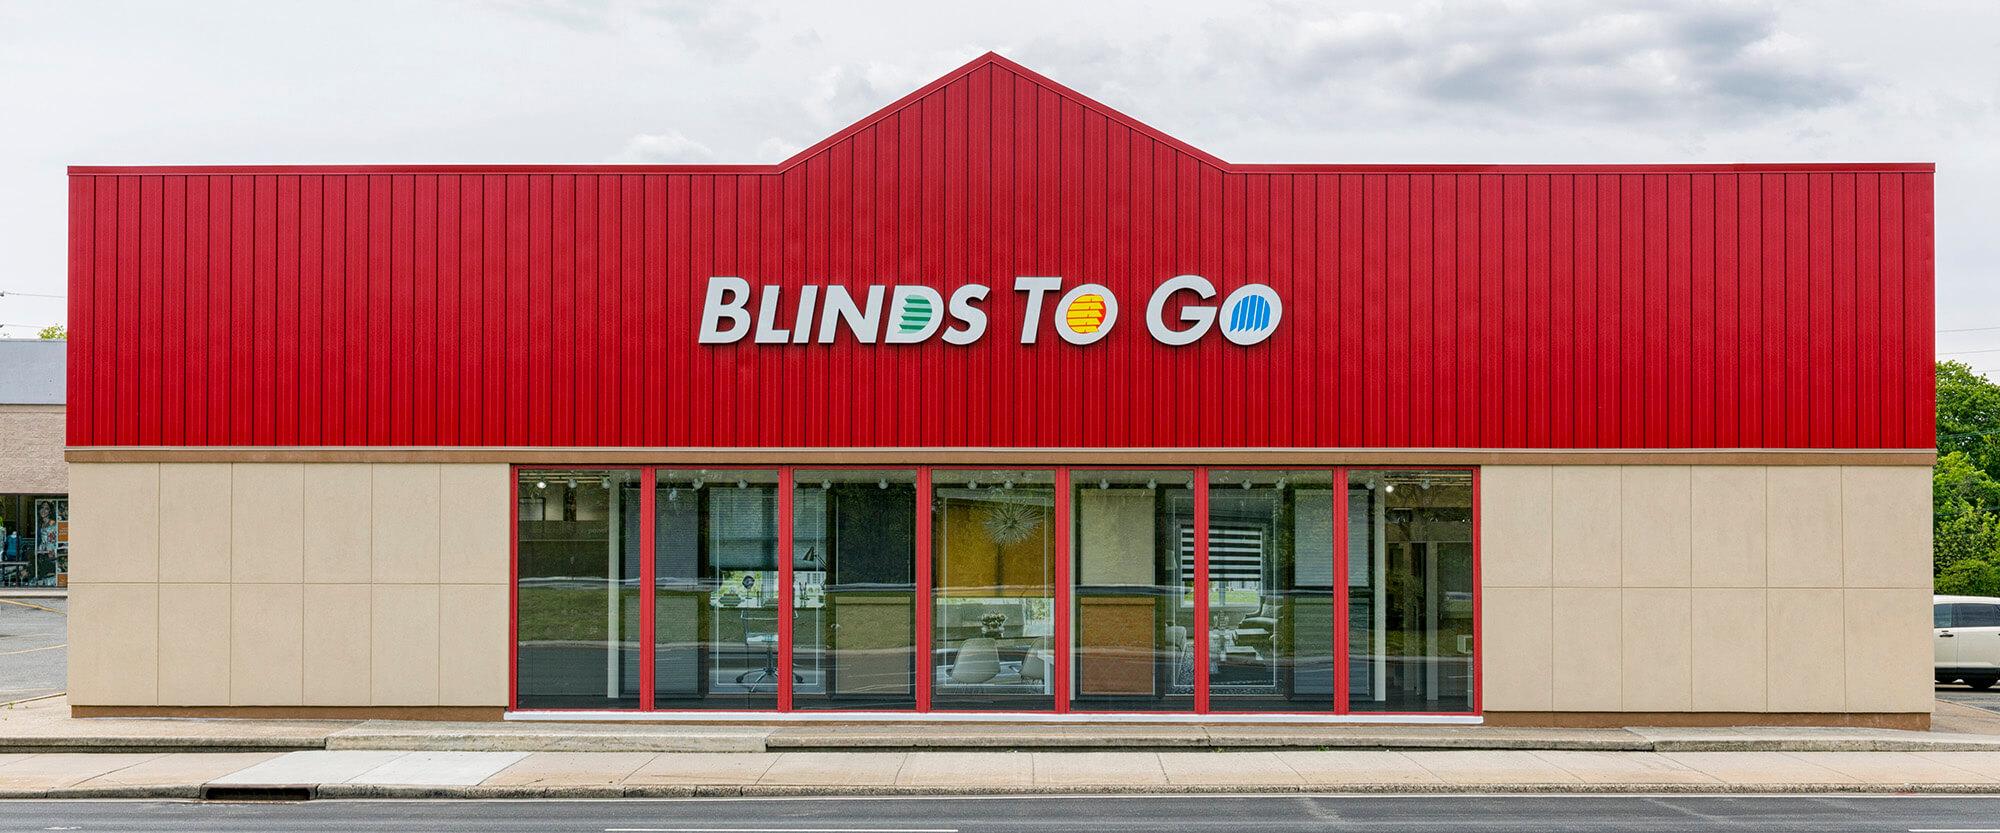 The Blinds To Go showroom that serves the Valley Stream area.